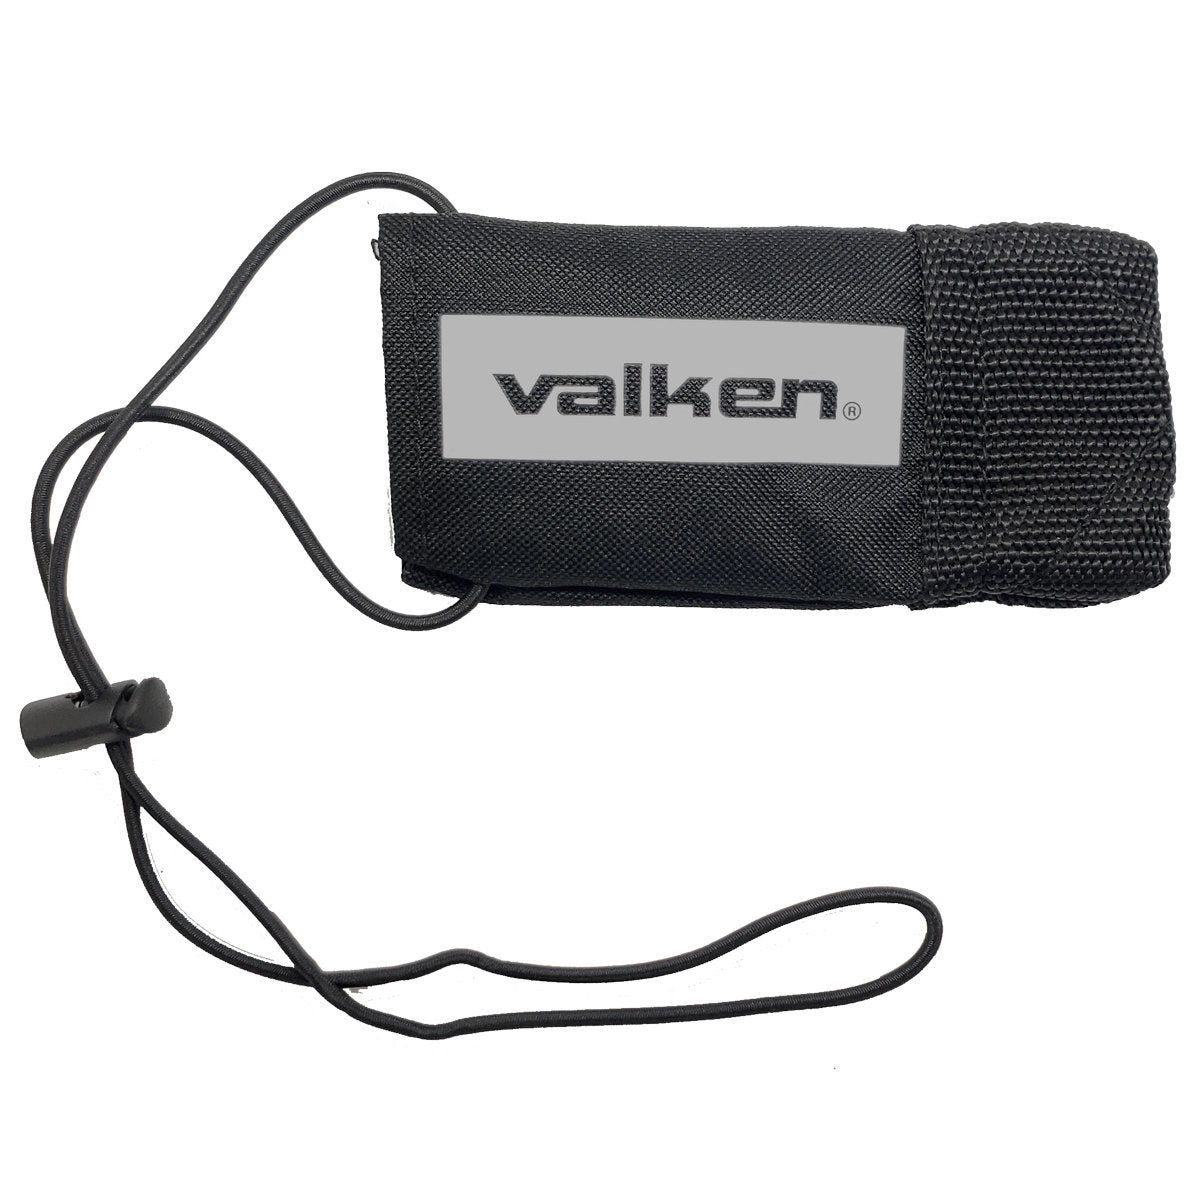 Valken TRG BLK/GRY Player Package